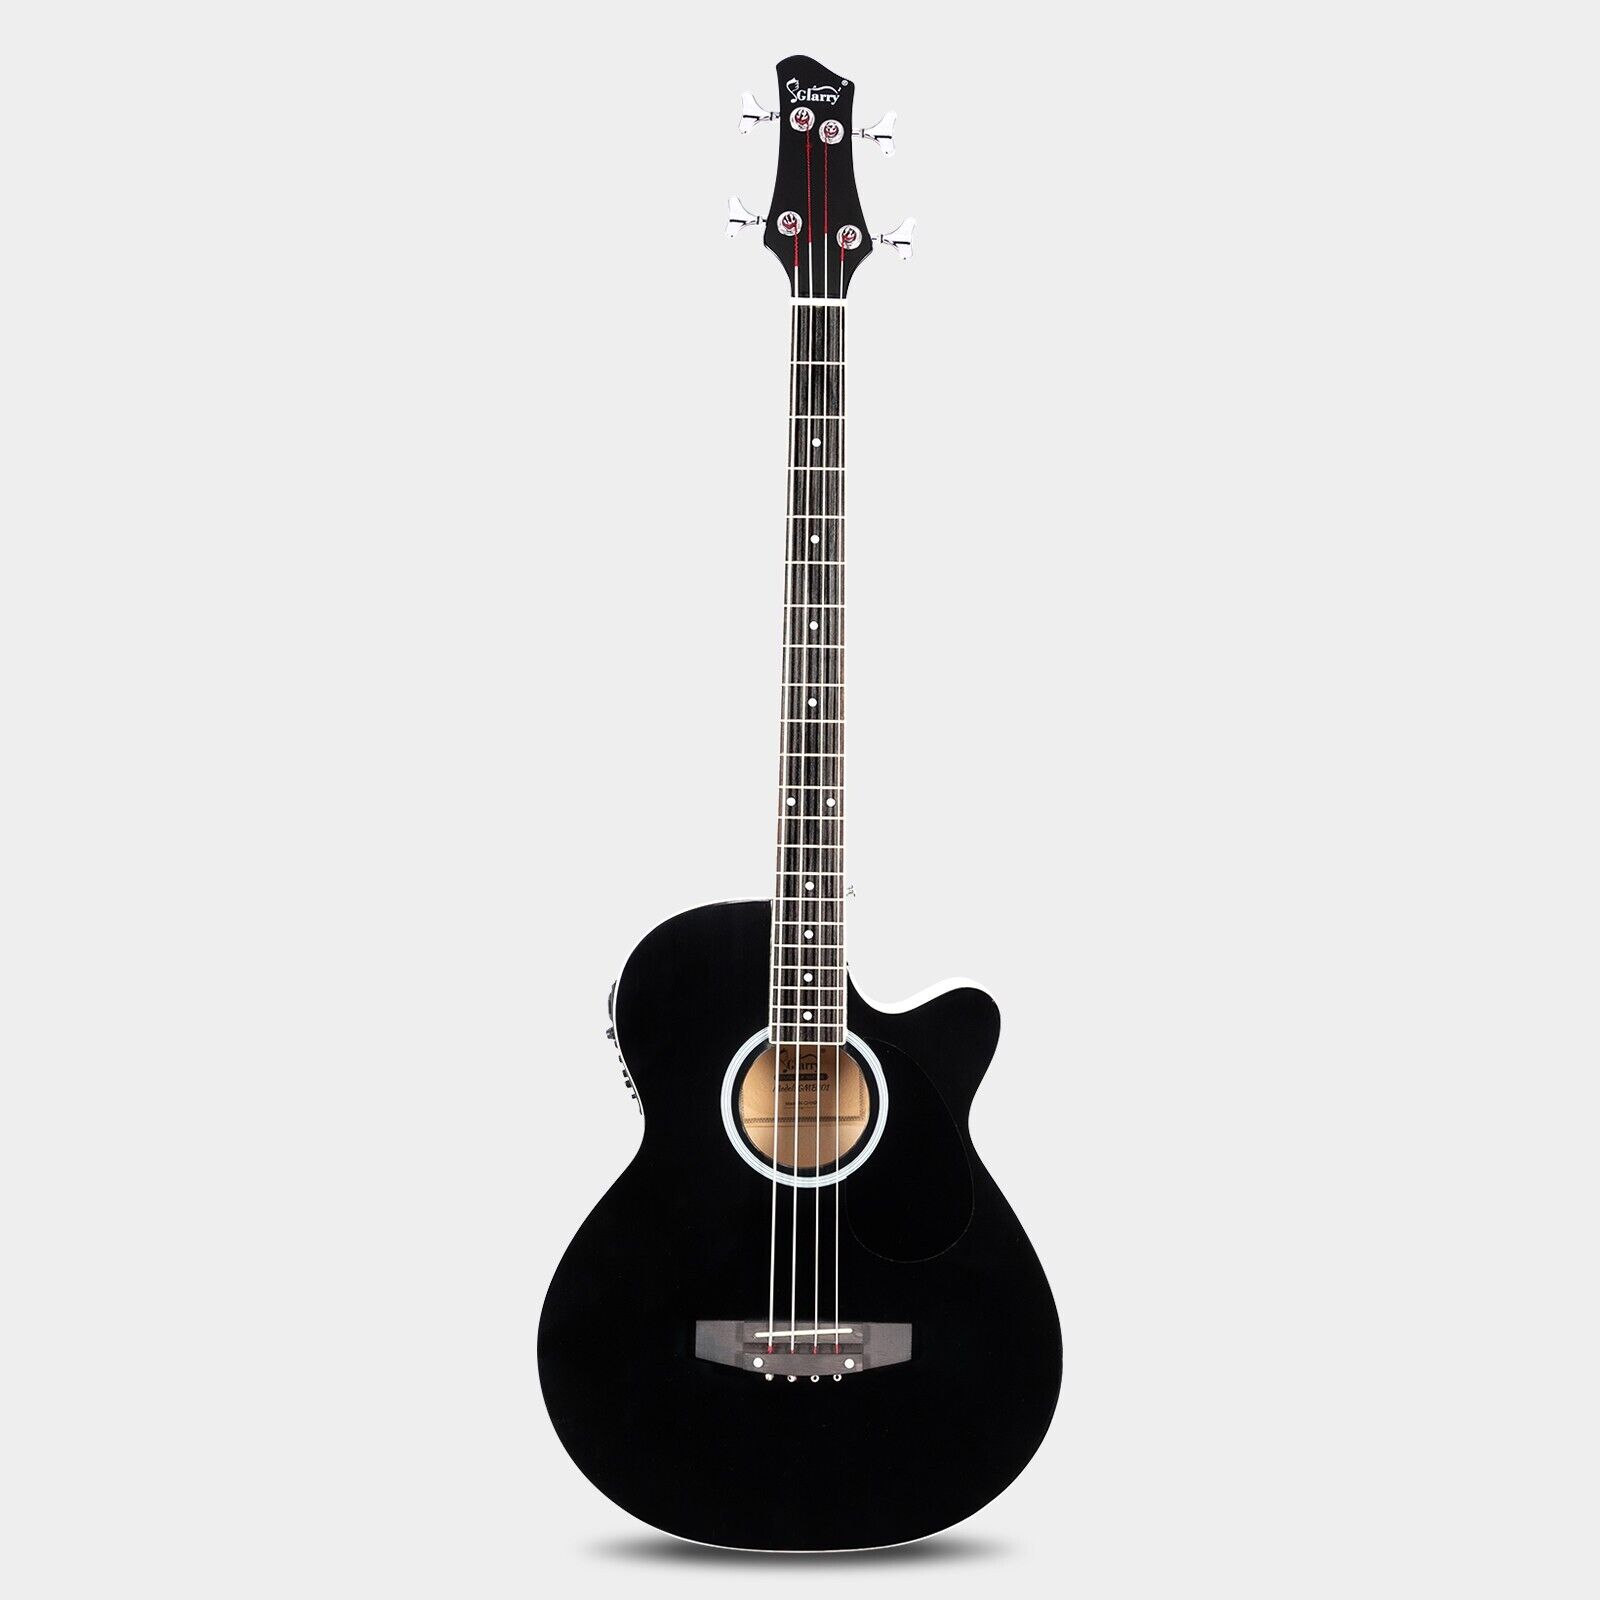 Glarry GMB101 Black 4 string Electric Acoustic Bass Guitar w/ 4-Band Equalizer 2